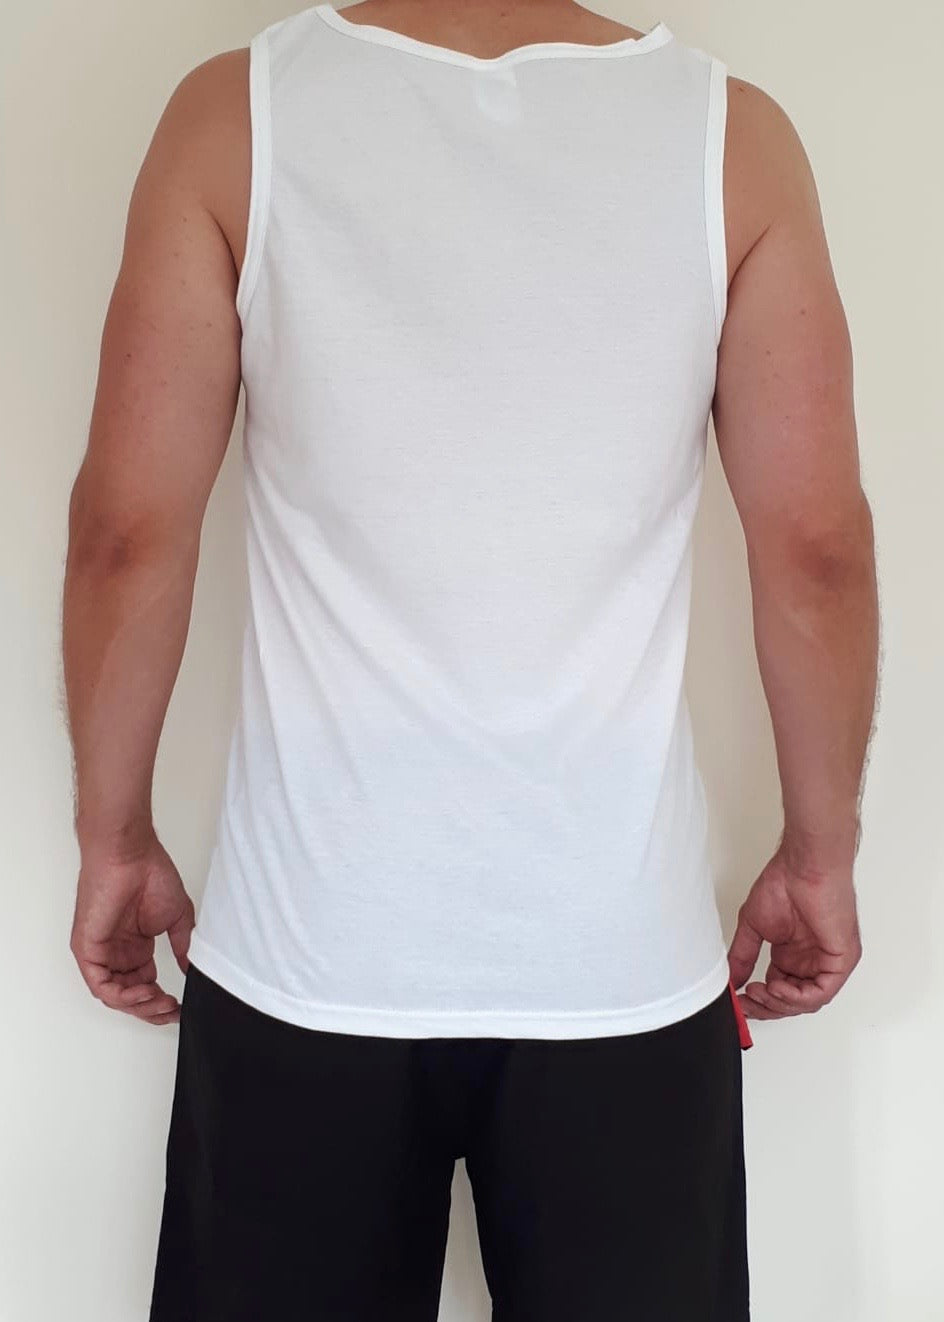 Men's white vest with Solo Traveller text. View of the back